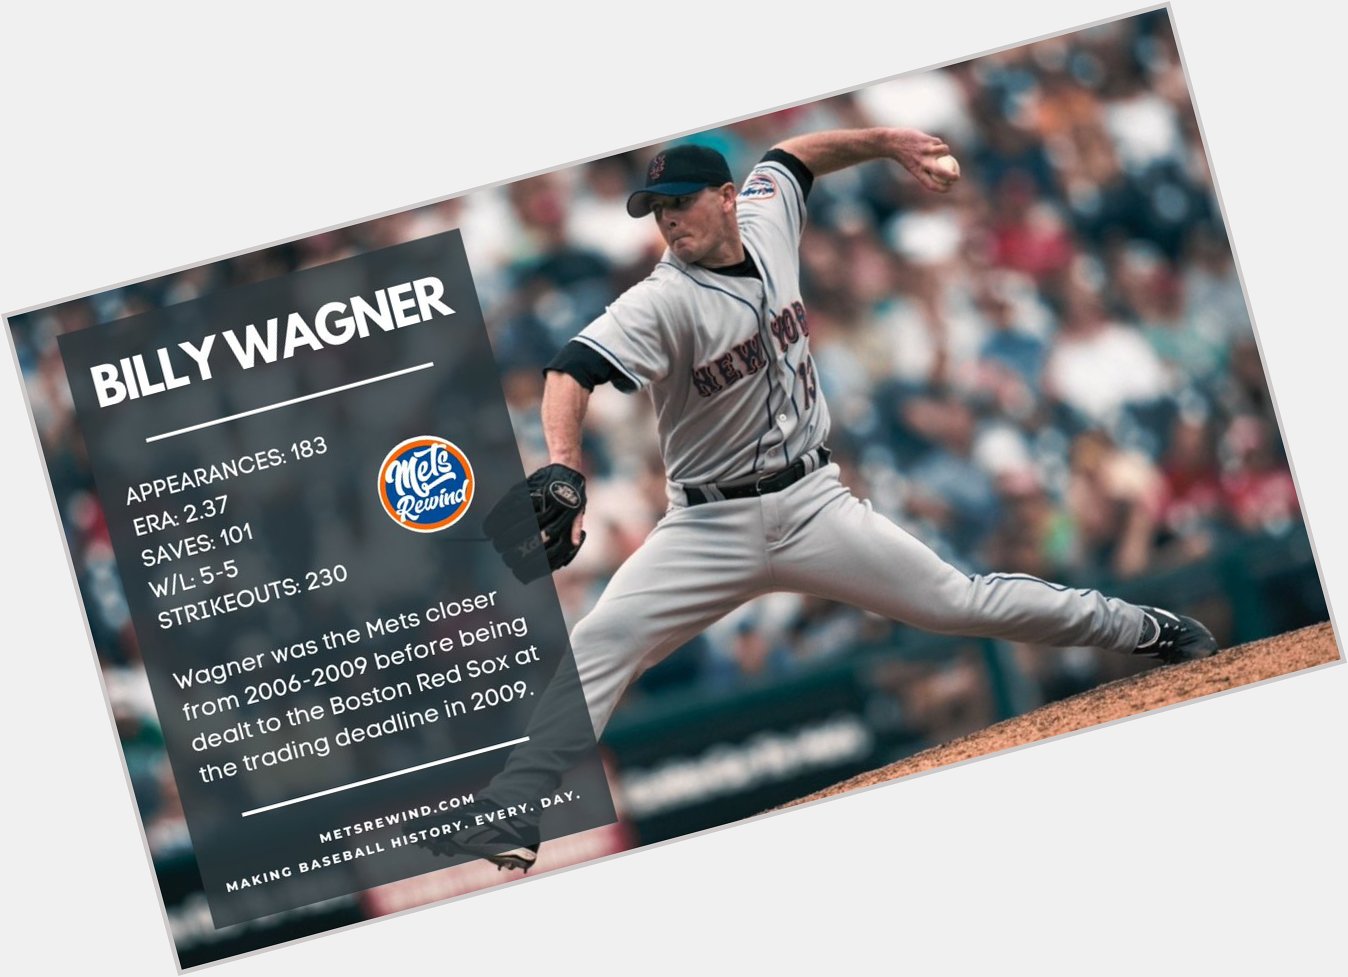 Happy Birthday, Billy Wagner! The former closer turns 51 today: 